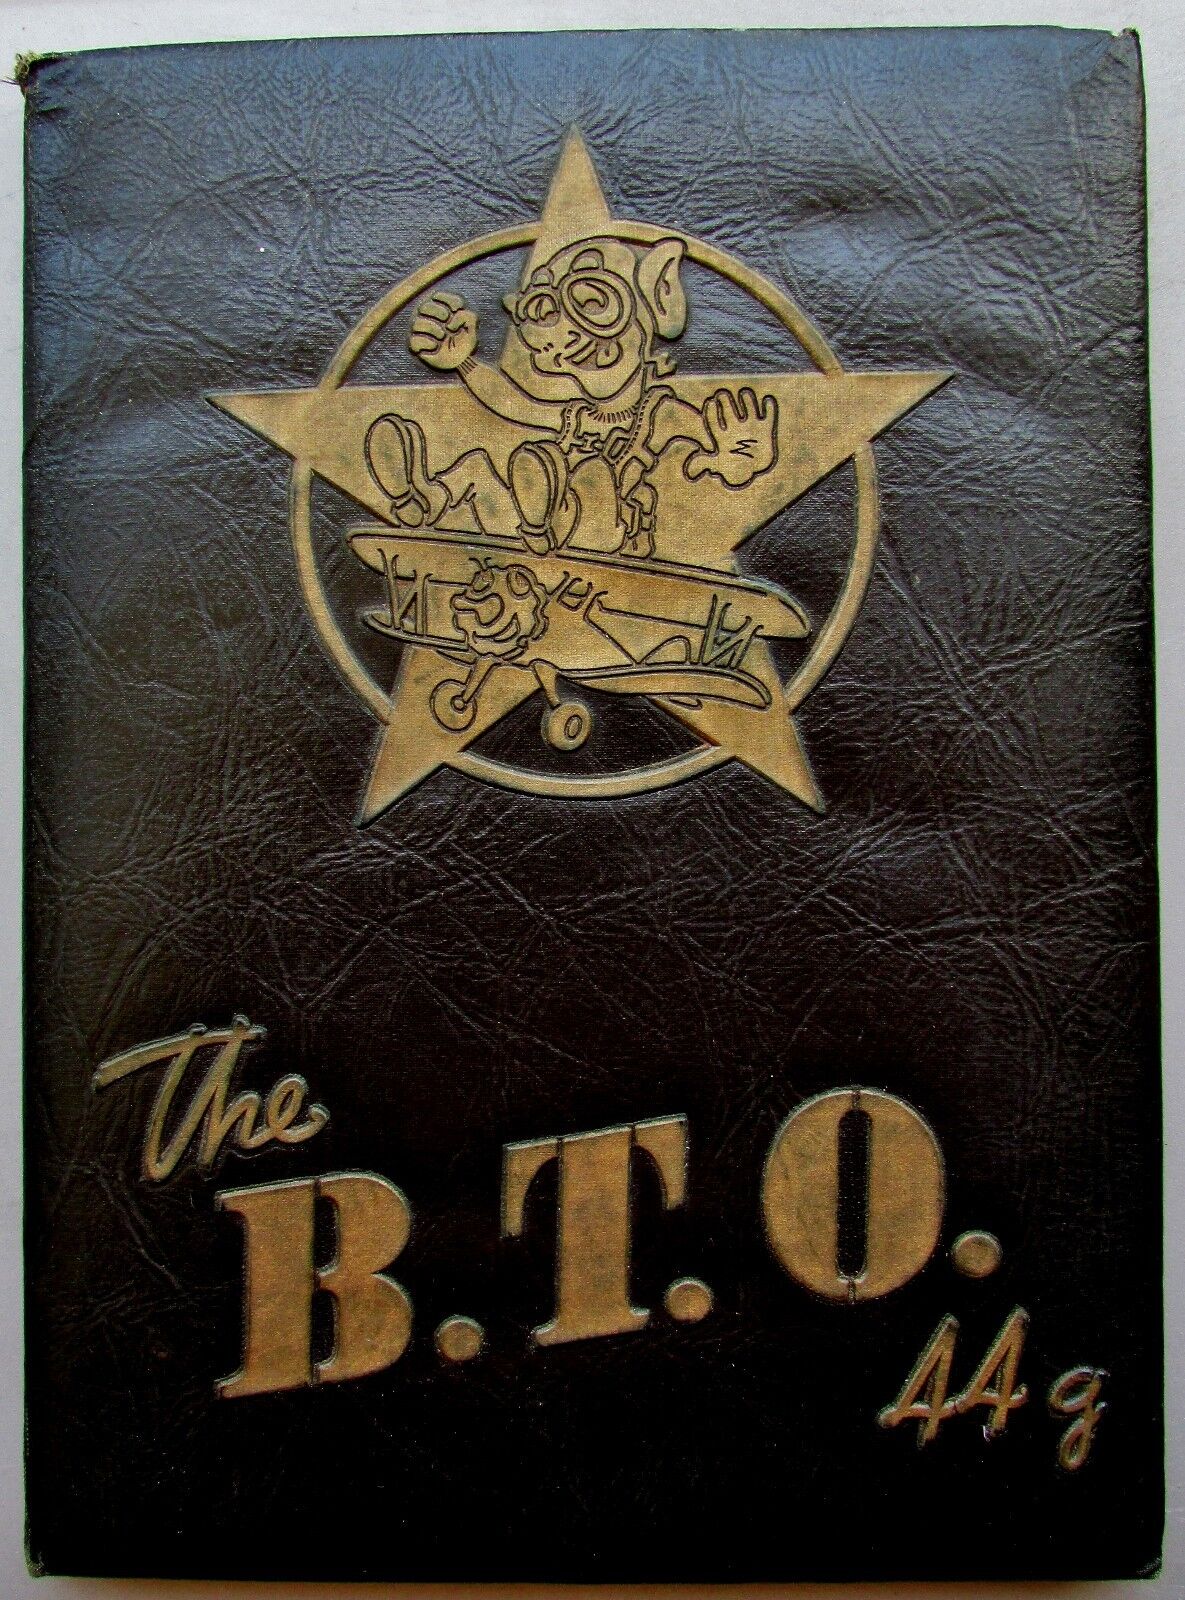 1944 USAAF Class 44-G BTO Yearbook Albany Army Airfield- Albany, Ga - 29th Wing